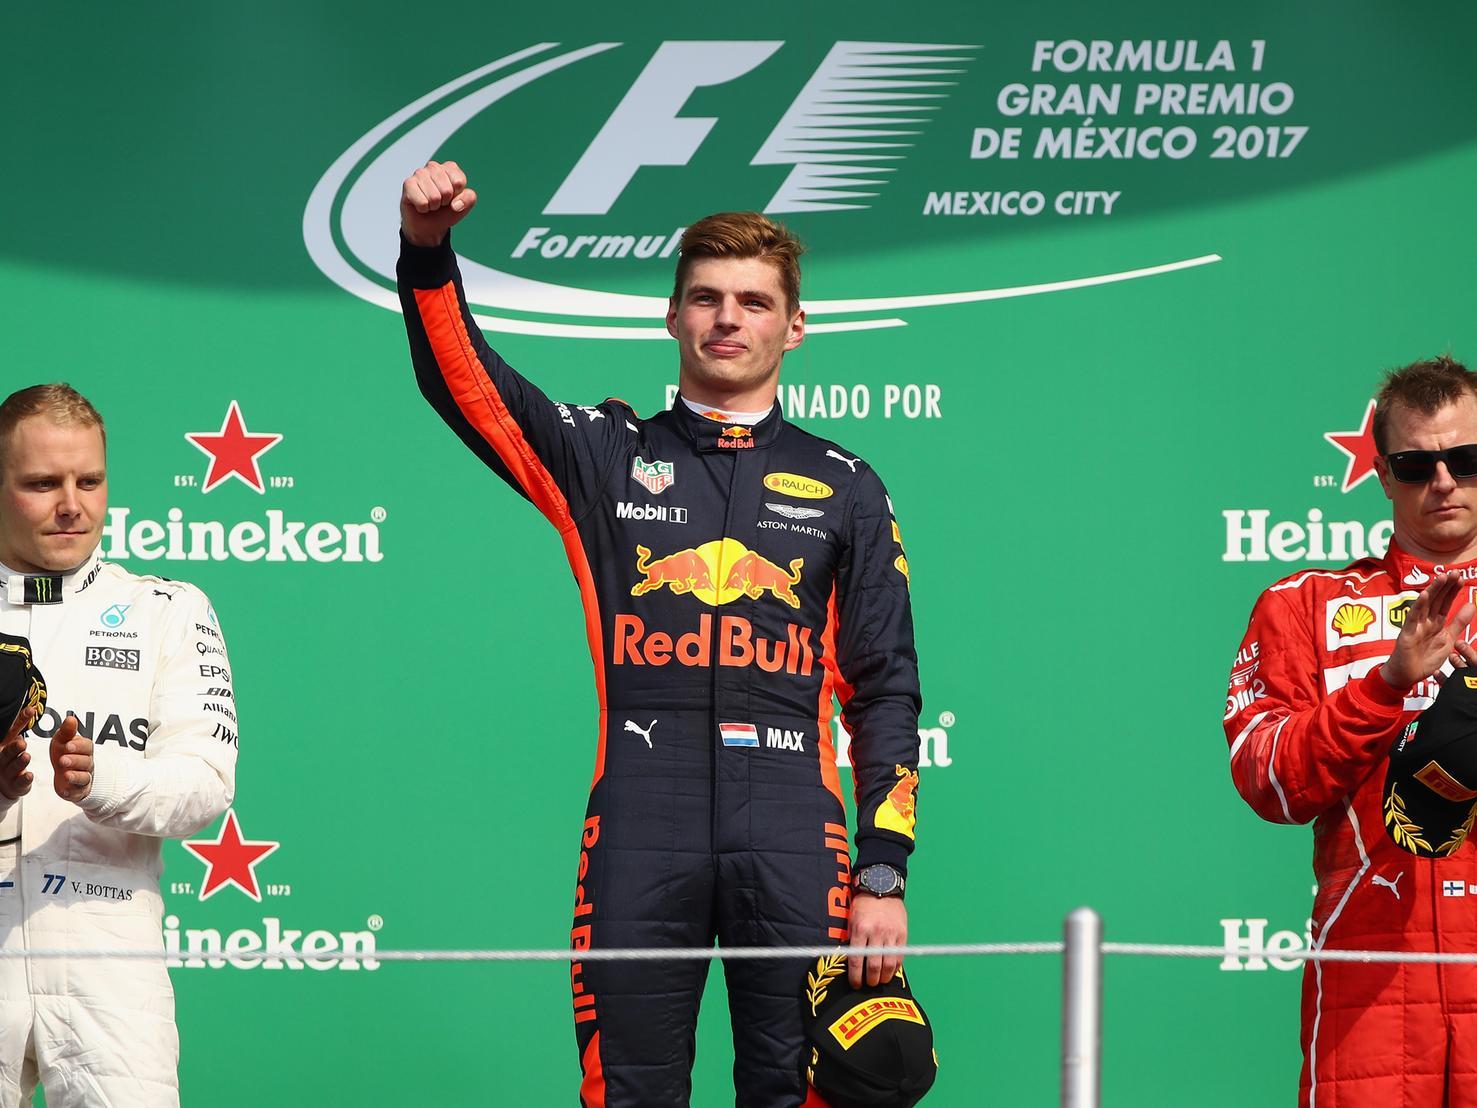 Verstappen's form late in the season dragged him up the championship standings, and he claimed his second win of the year in Mexico.